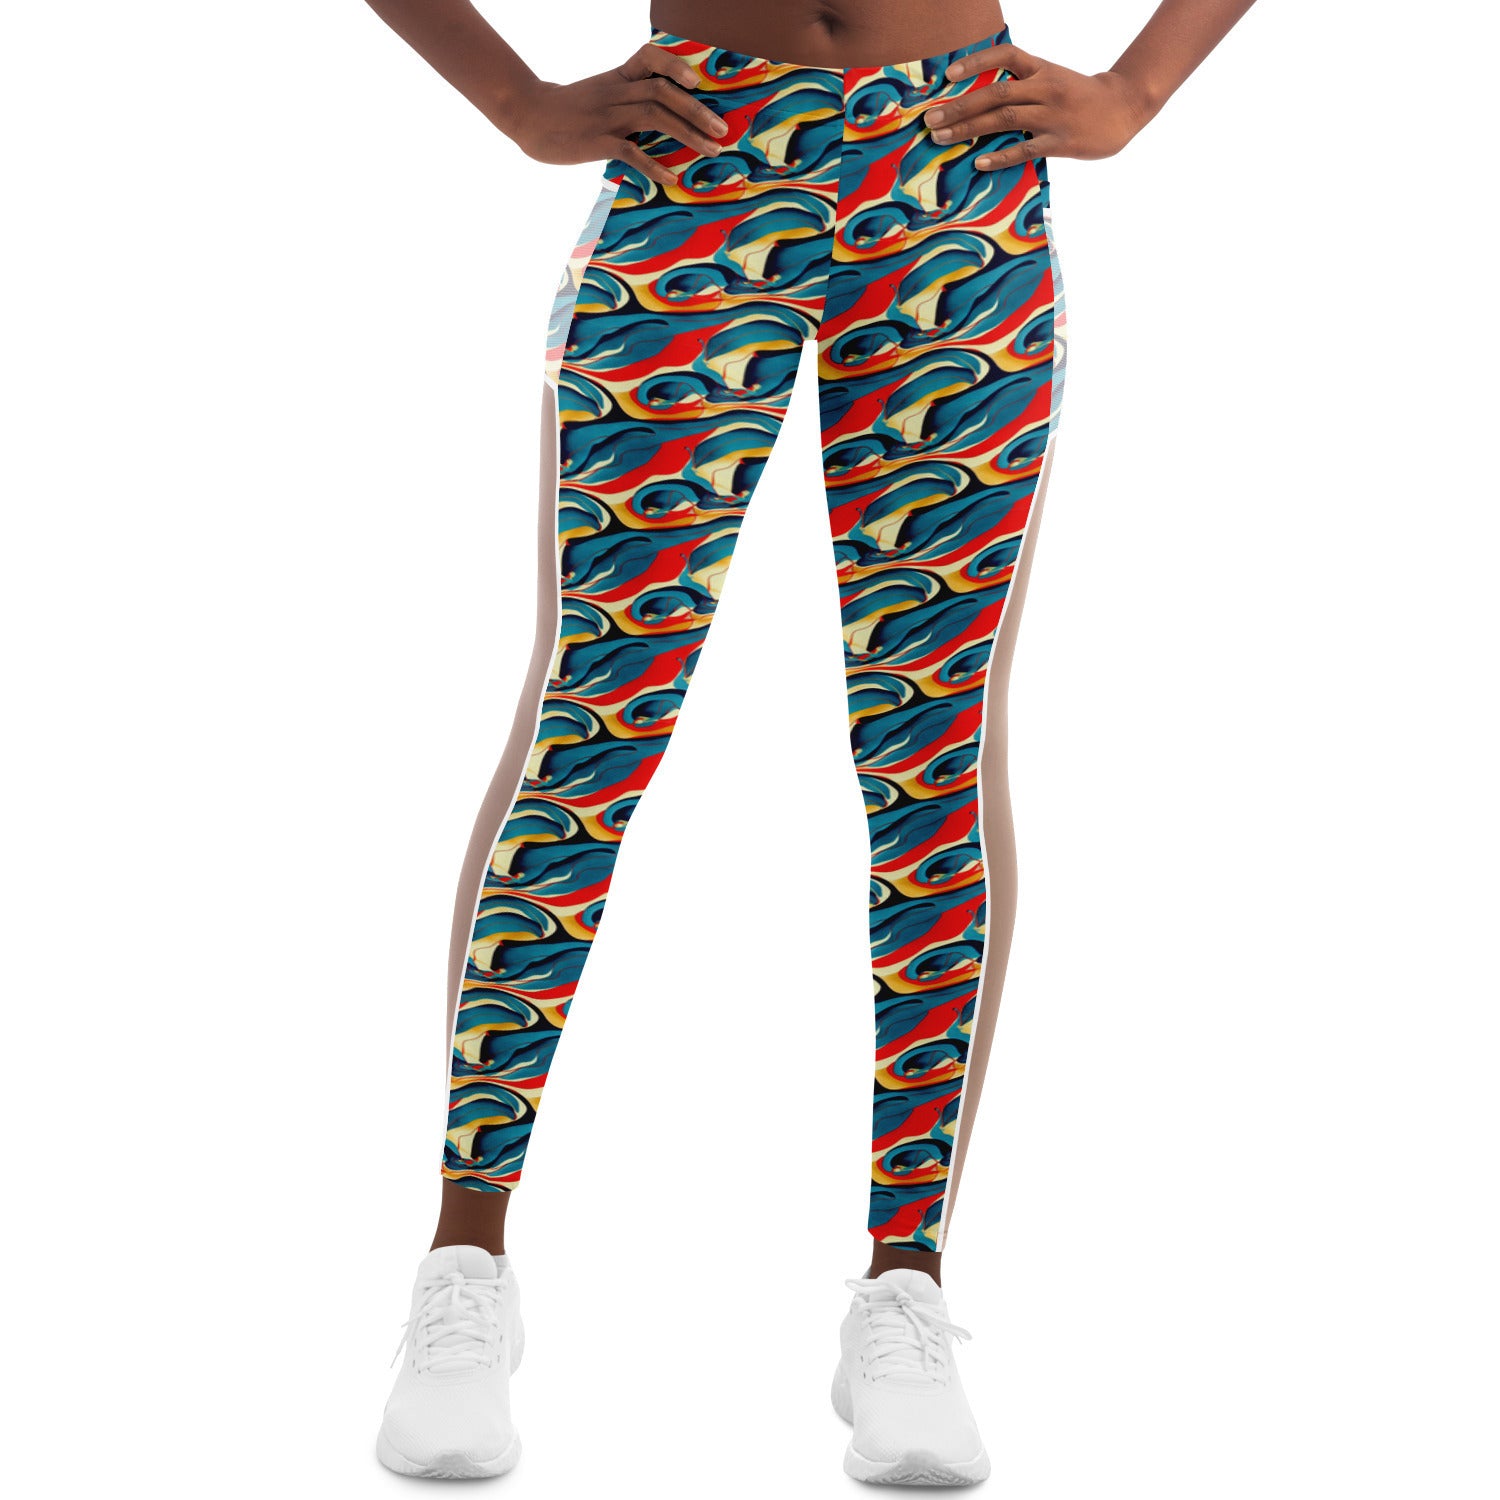 Flowing Mesh Leggings: Breathable Panels with Abstract Patterns